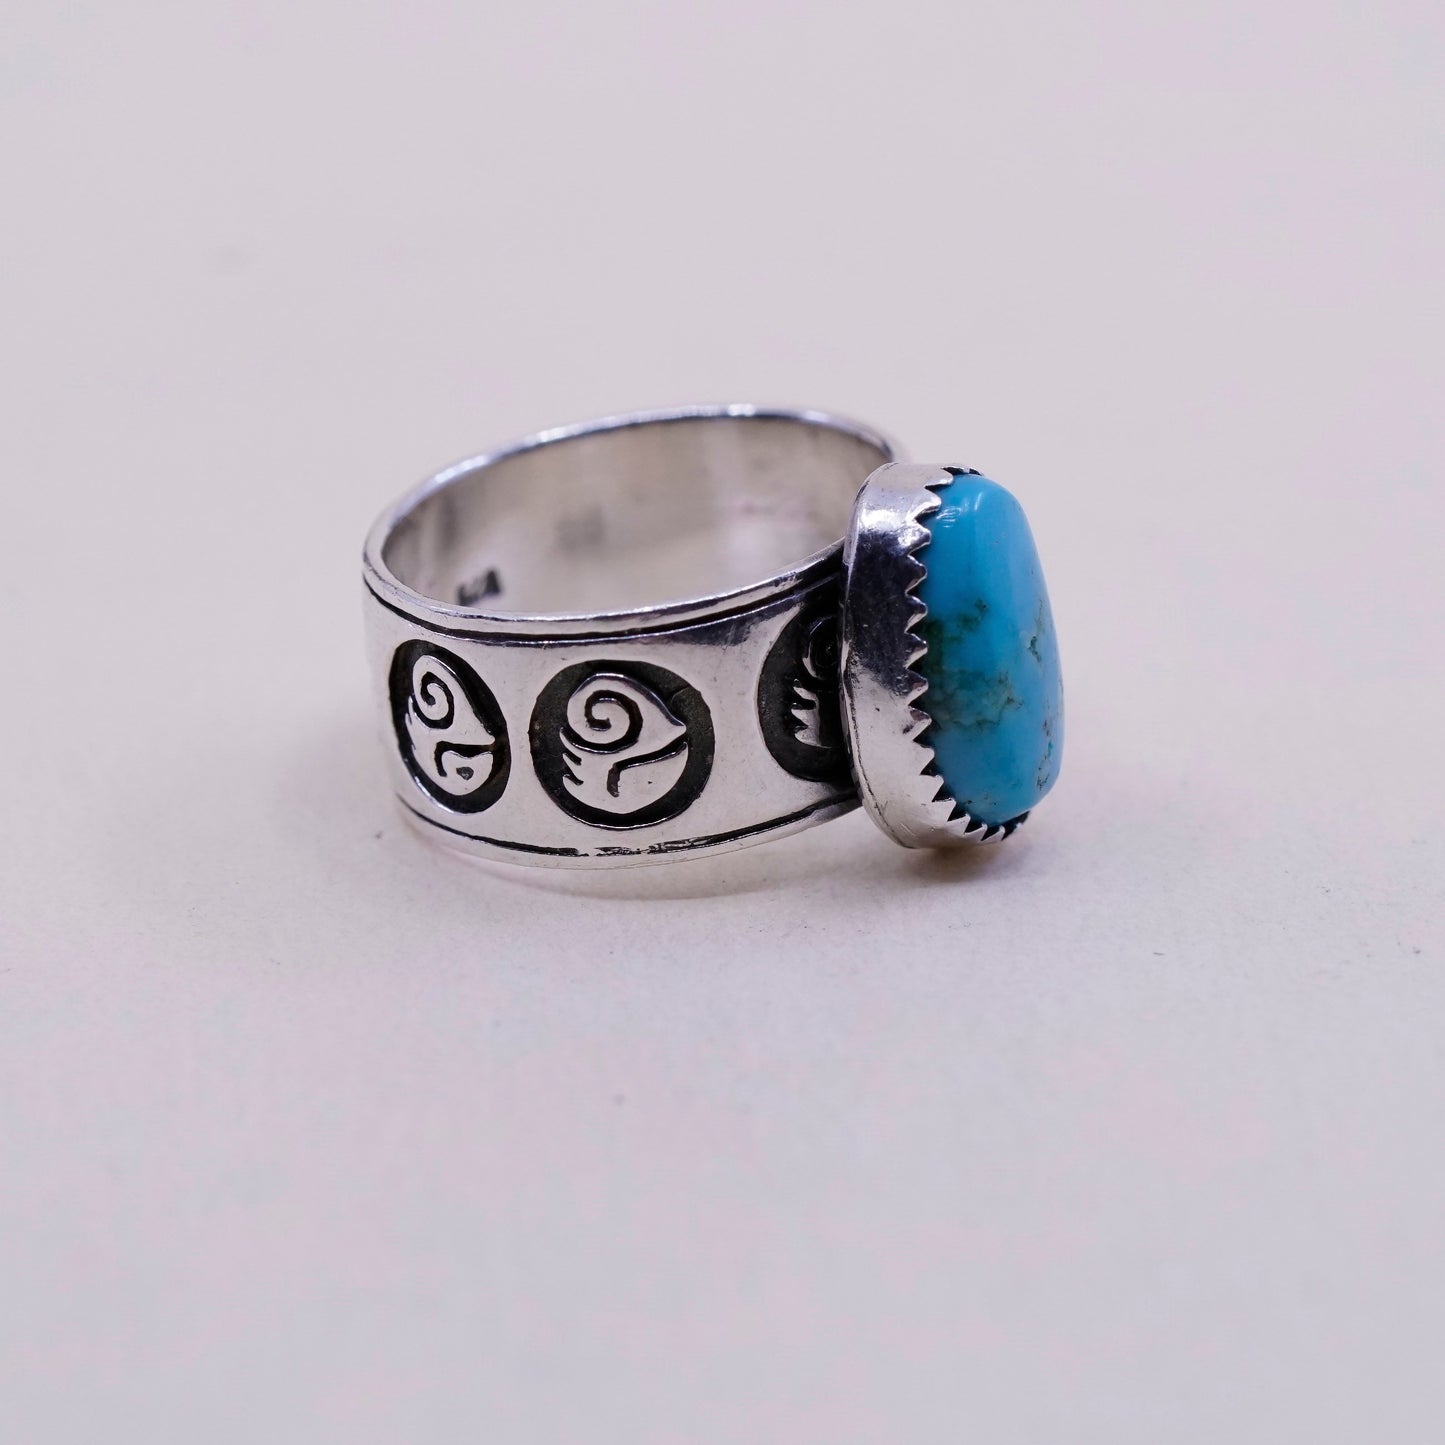 sz 7, vtg sterling silver ring, handmade 925 band embossed dragon w/ turquoise